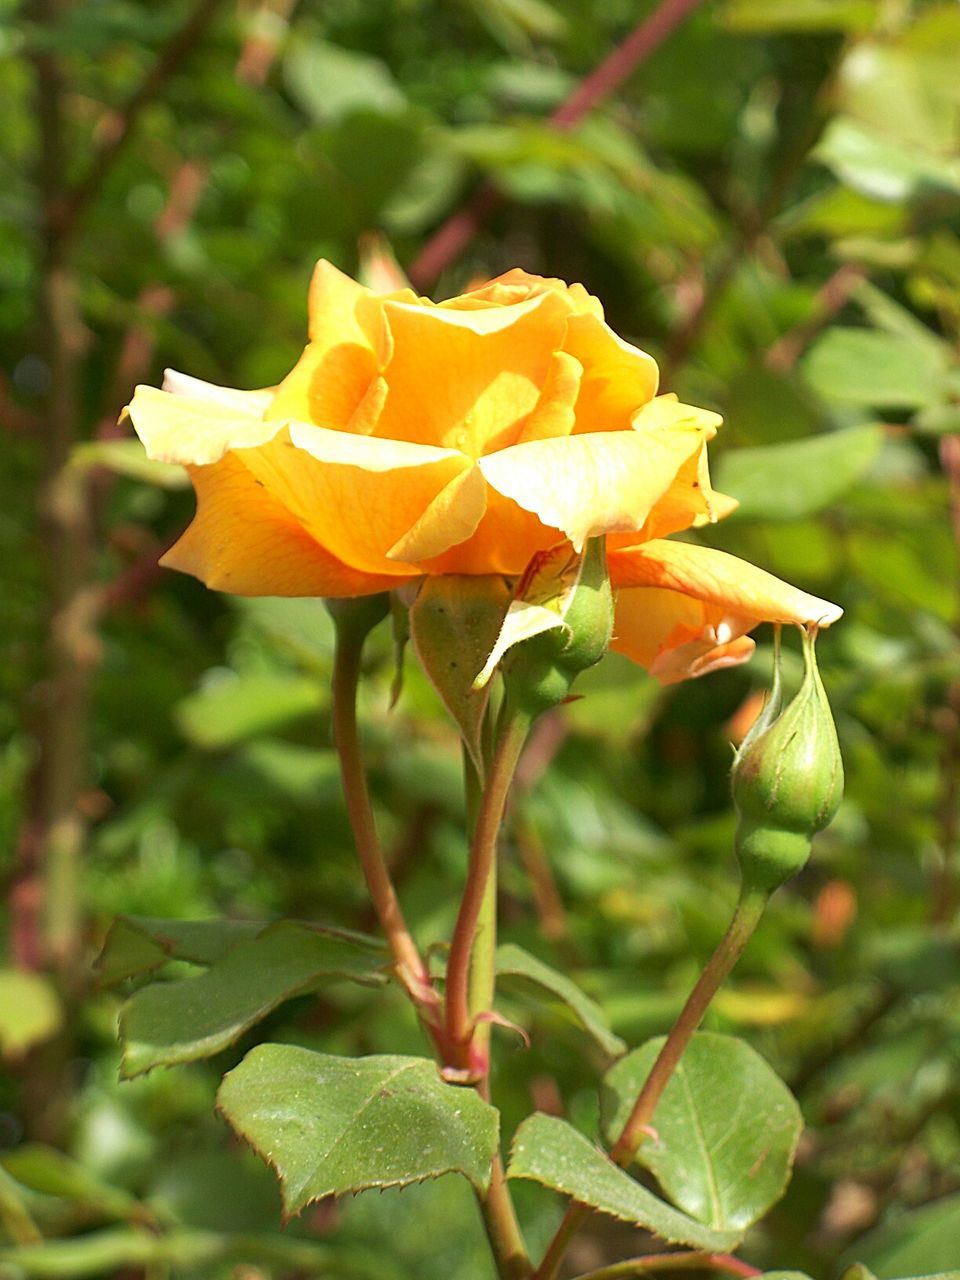 CLOSE-UP OF YELLOW FLOWER